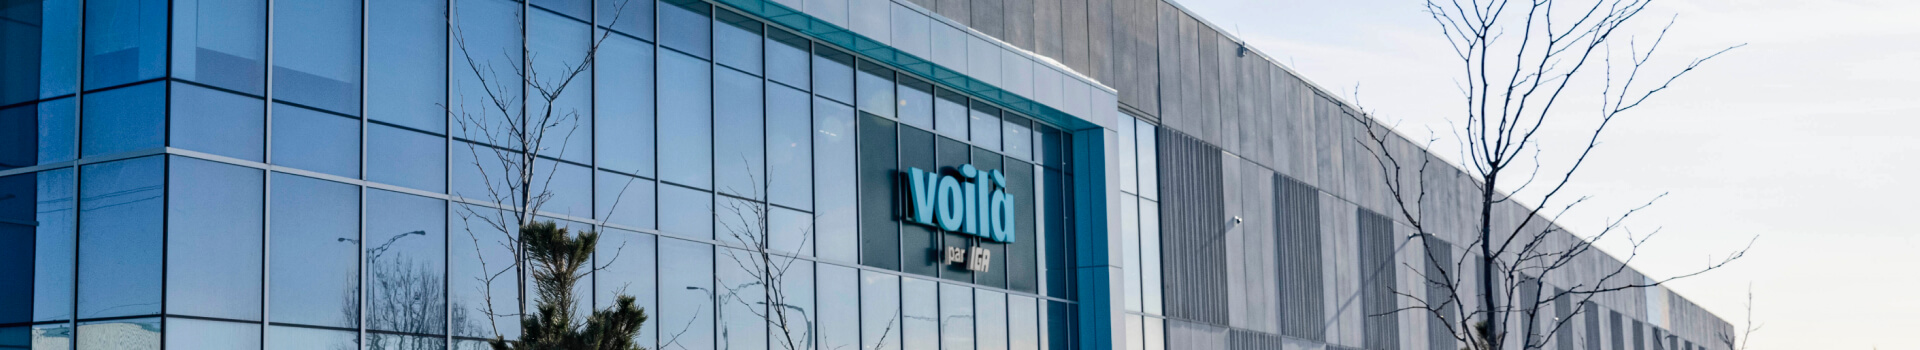 An image showing the building with Voila branding logo in the centre